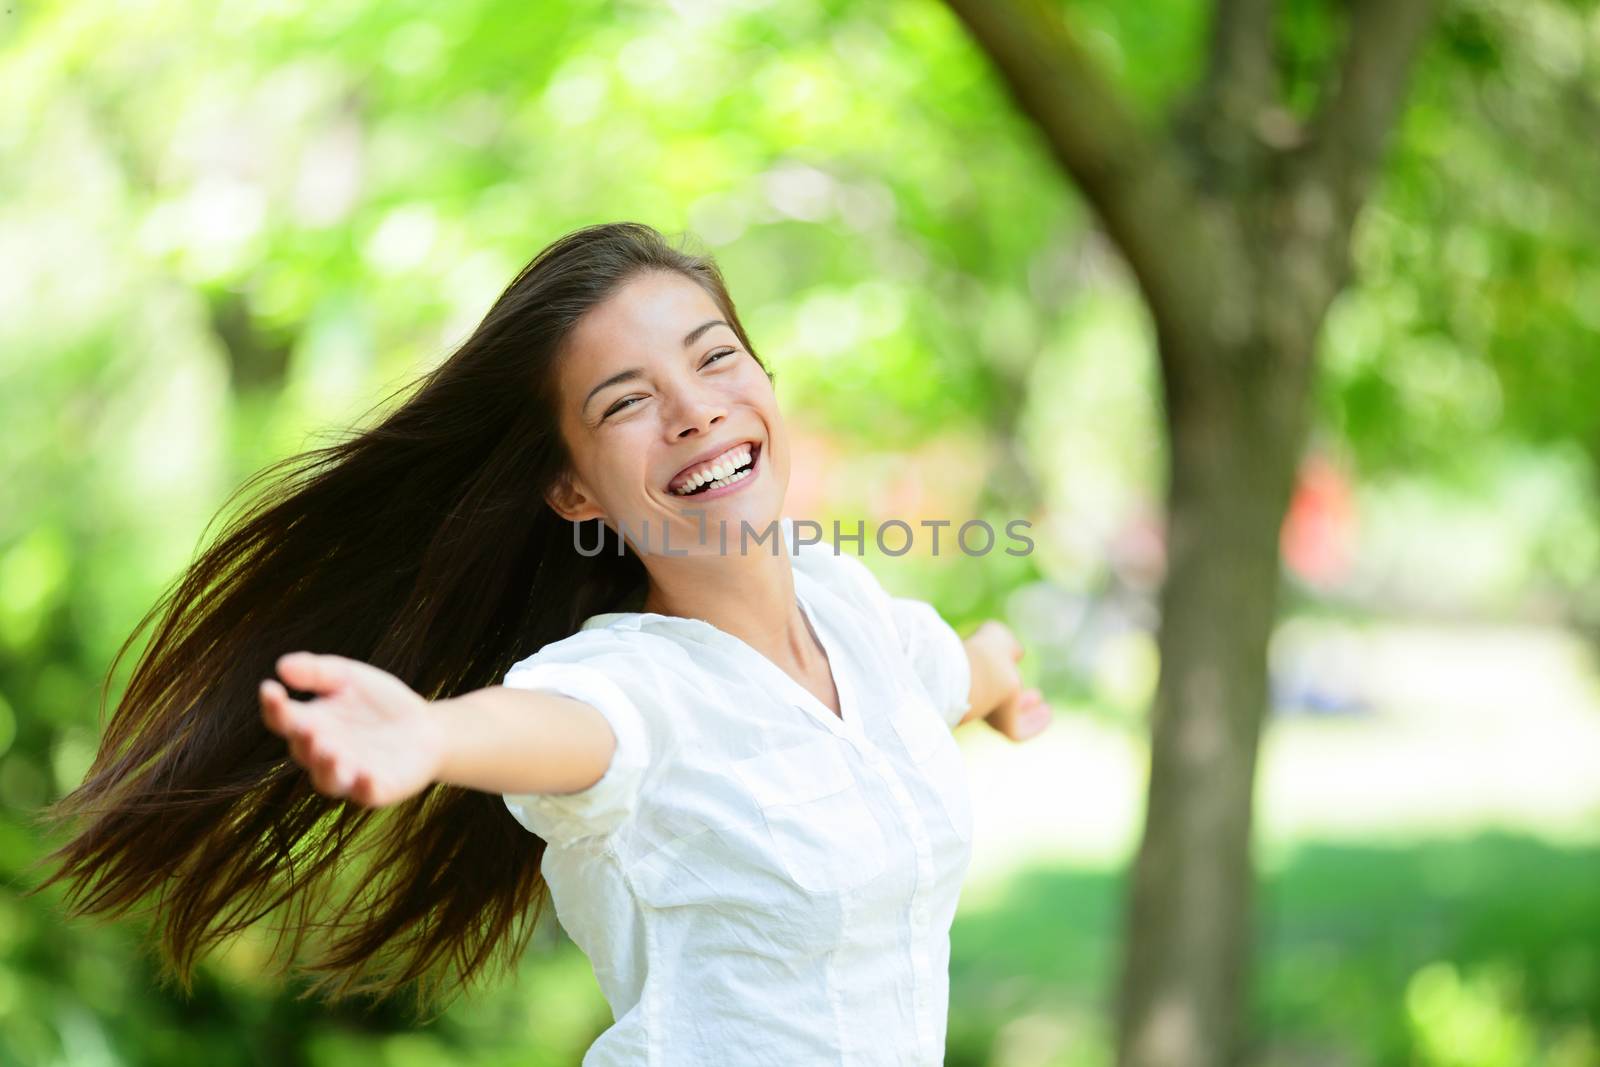 Cheerful young woman with arms outstretched enjoying in park. Portrait of beautiful female is in casuals. Joyful woman is enjoying nature during summer.